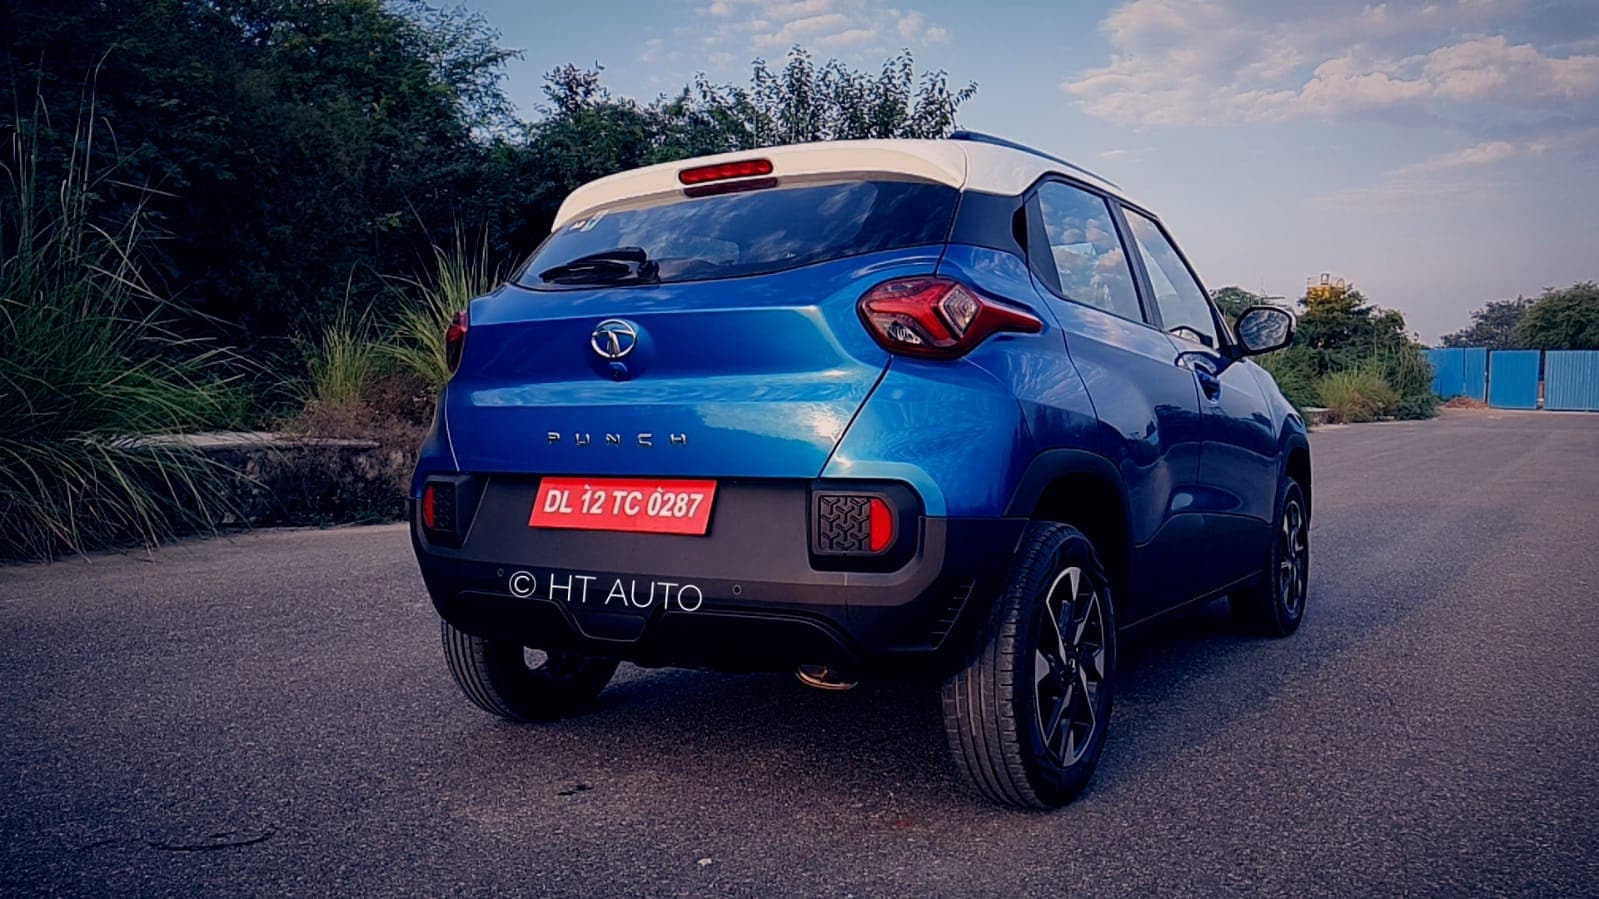 A look at the rear profile of Tata Punch.